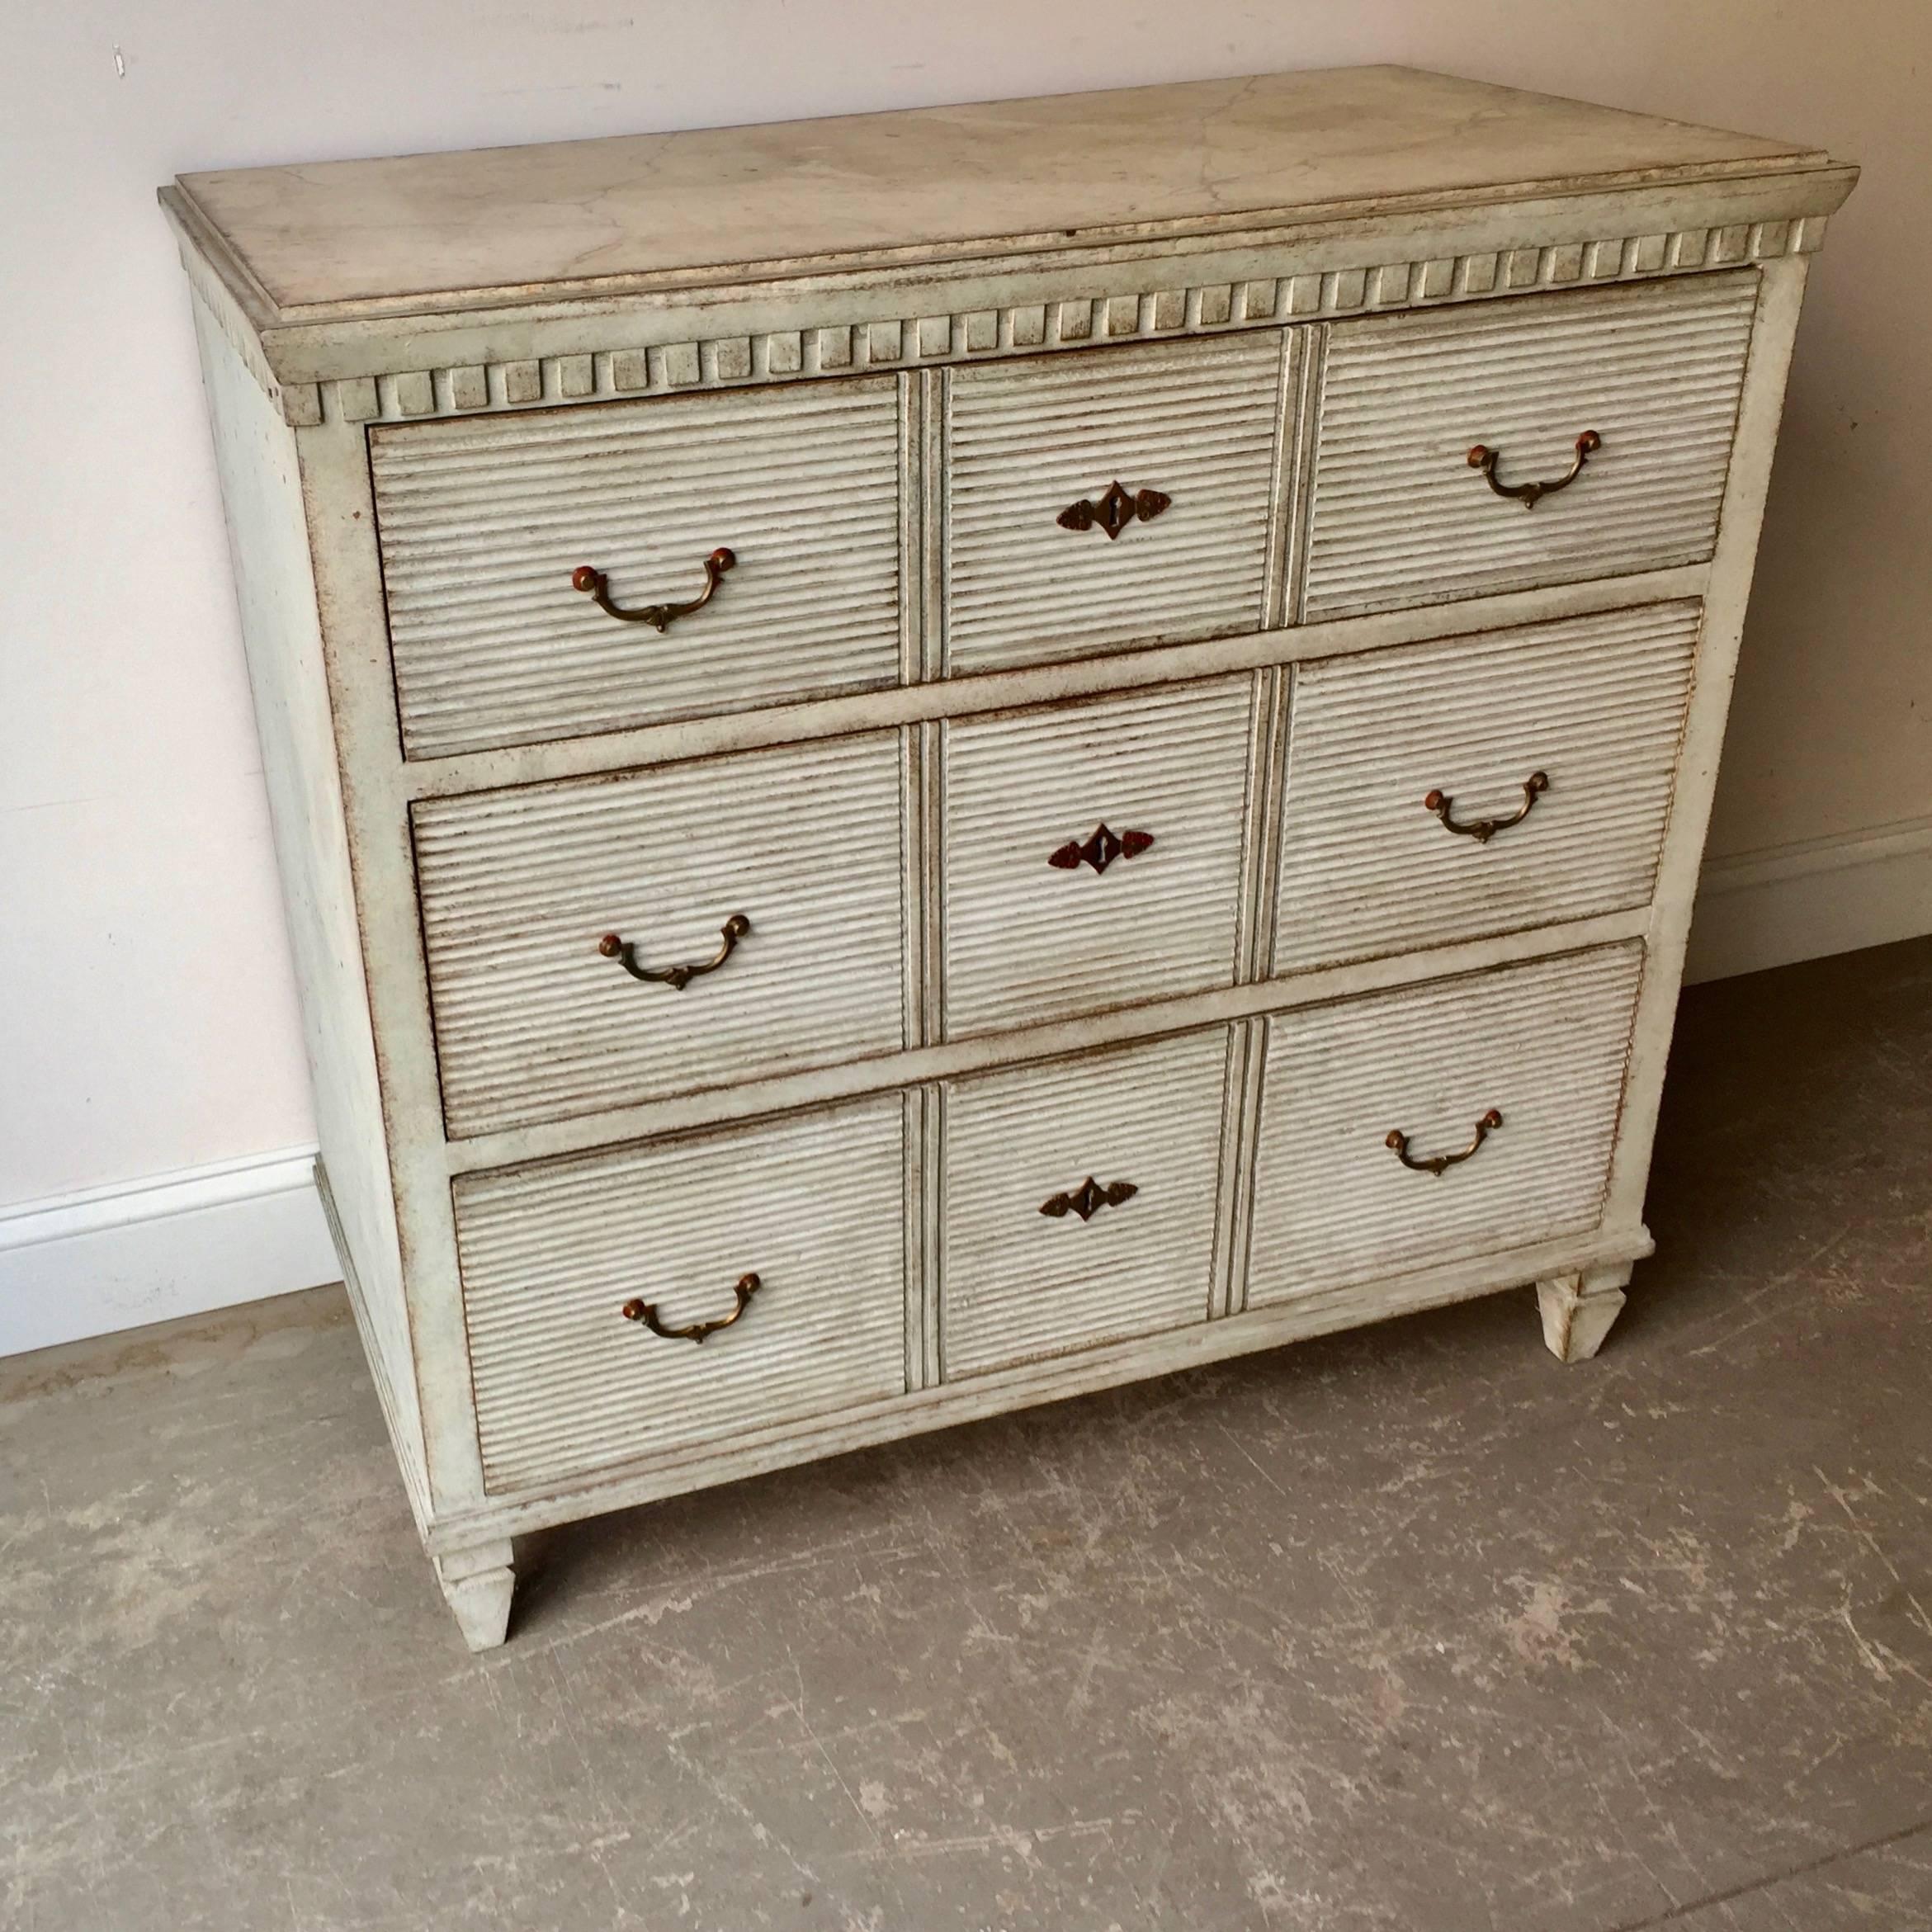 Gustavian Period Chest of drawers, Sweden circa 1810,  with three raised reeded panels on each of its drawer fronts.  Dentil molding under the shaped top . Original brass hardware.
Here are few examples … surprising pieces and objects, authentic,